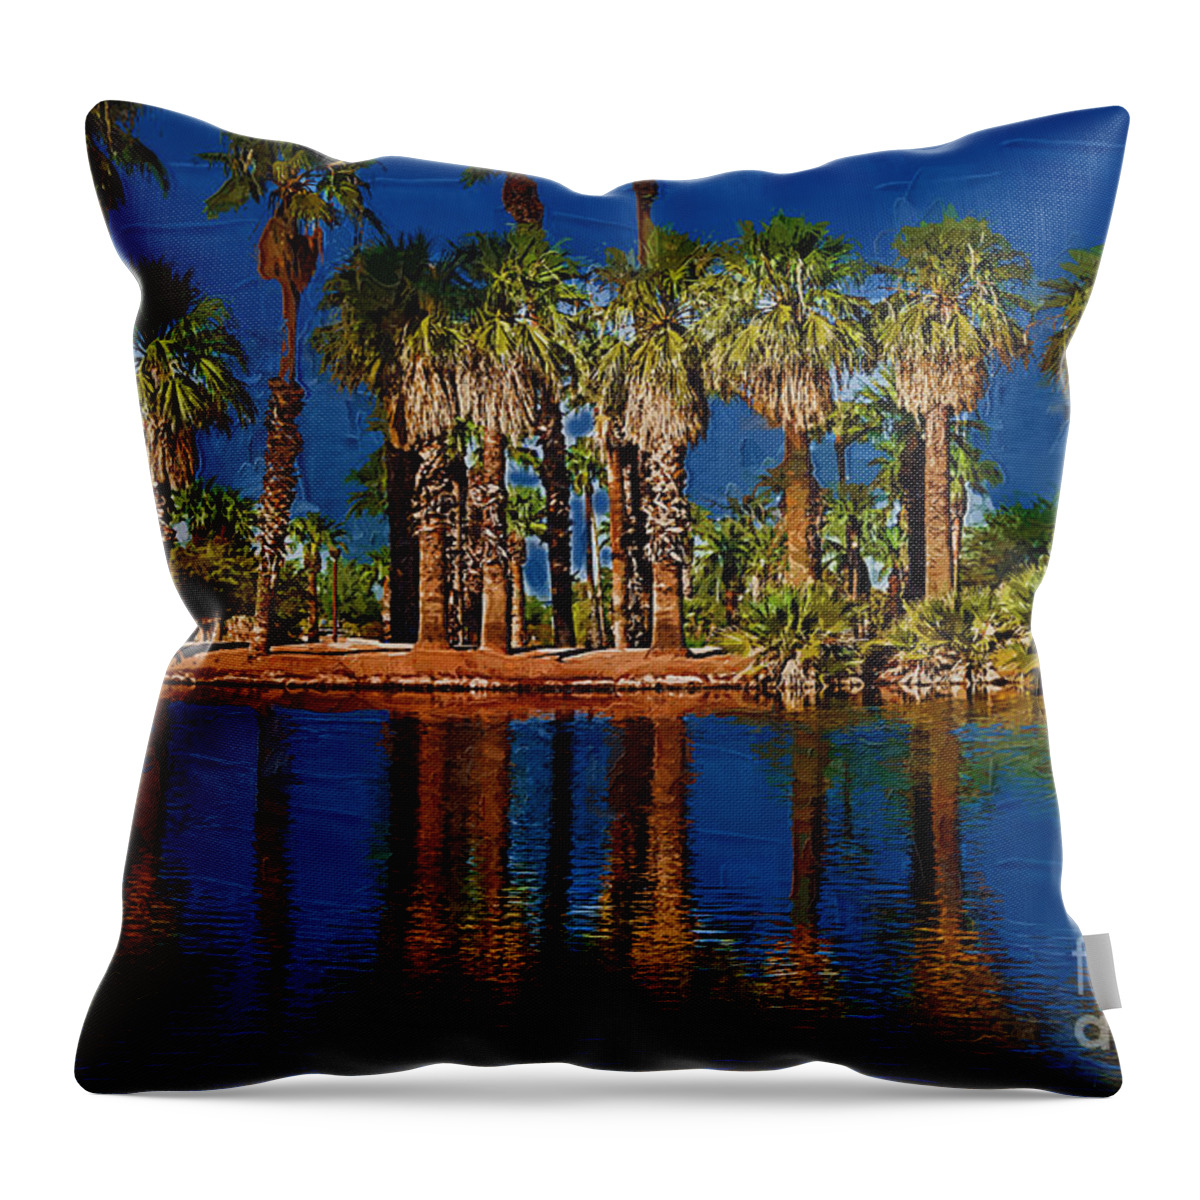 Papago-park Throw Pillow featuring the digital art Palm Trees On The Water by Kirt Tisdale